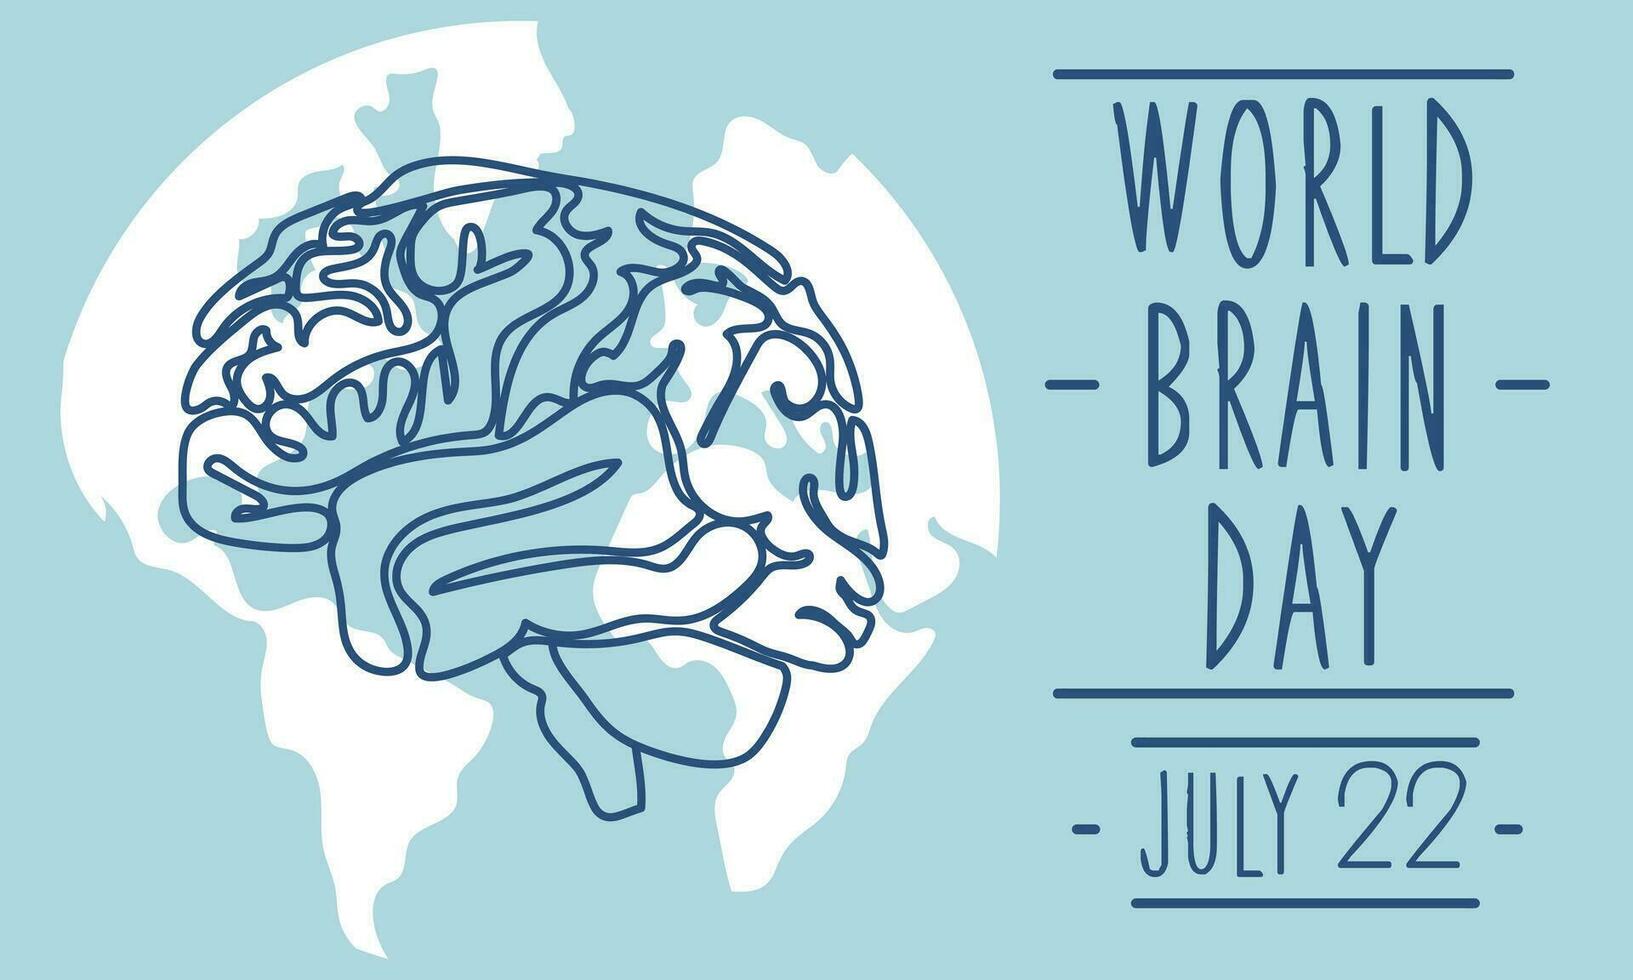 Postcard for World Brain Day, vector illustration with a cute brain in cartoon style on the background of the earth. July 22 and the bright blue outline of the human brain. Medicine, human health